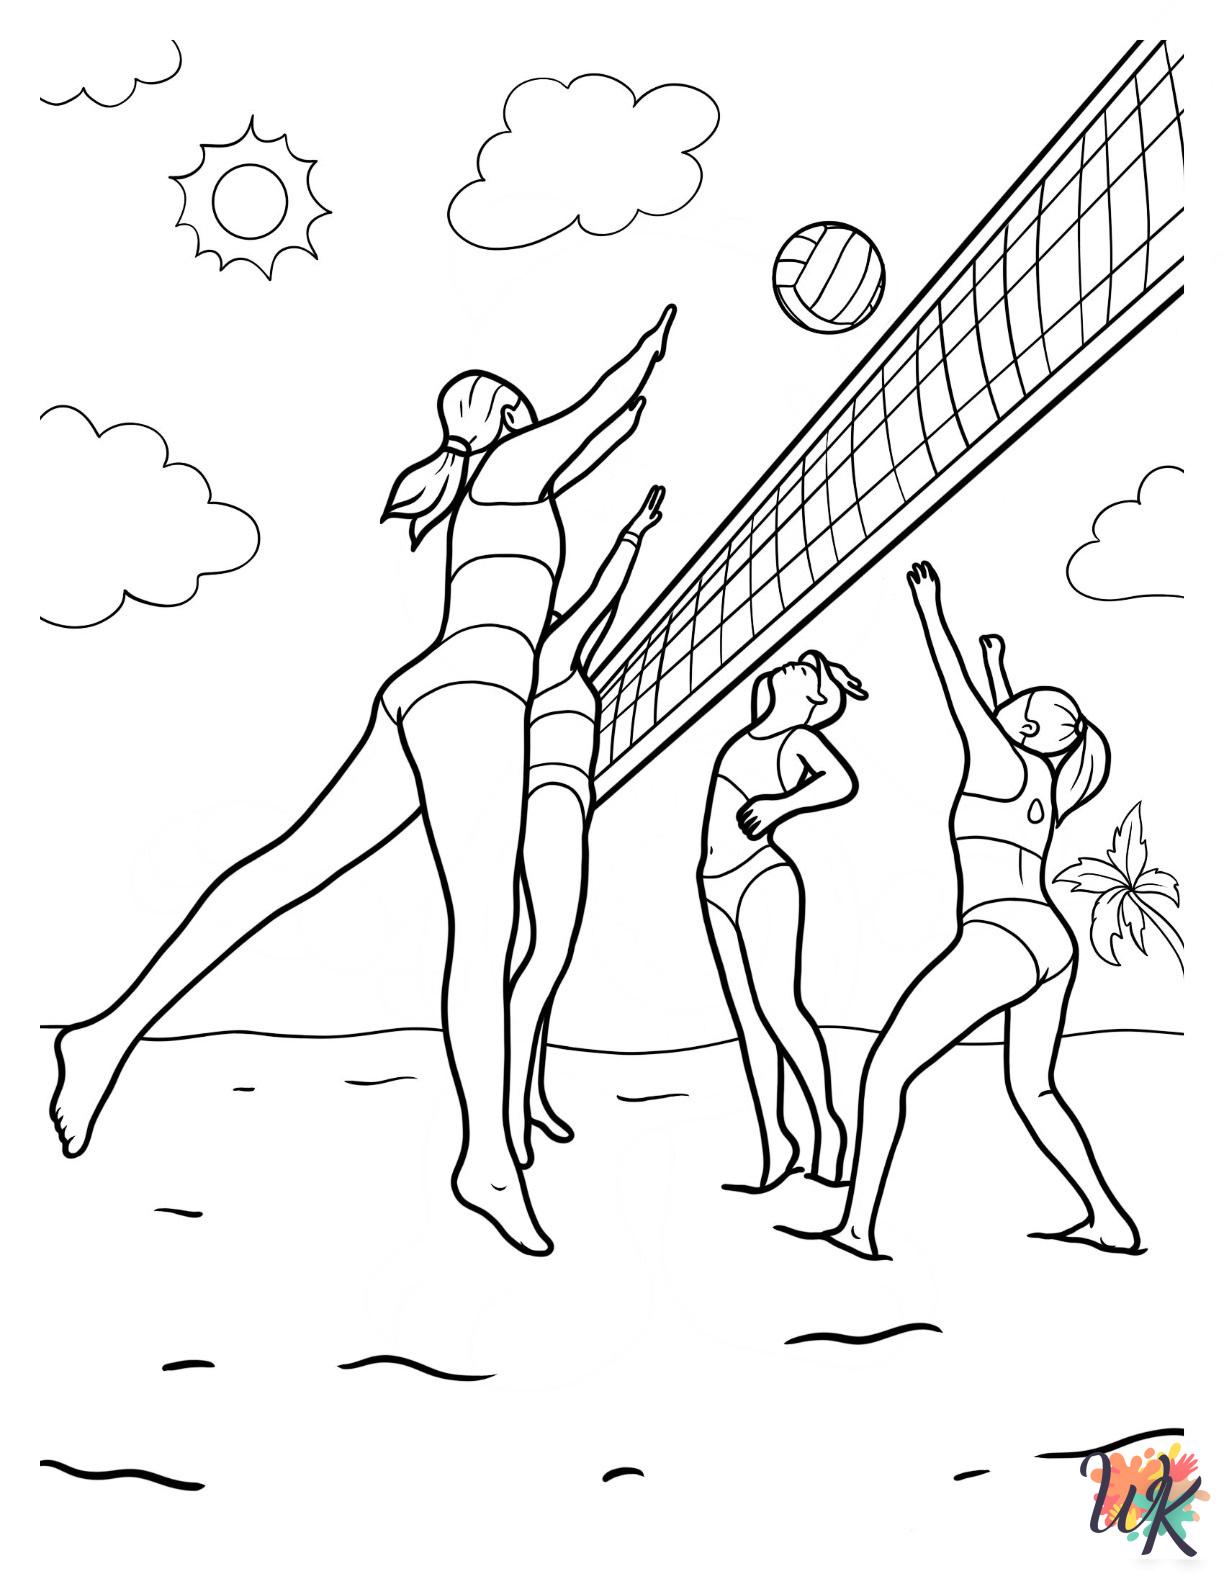 Volleyball cards coloring pages